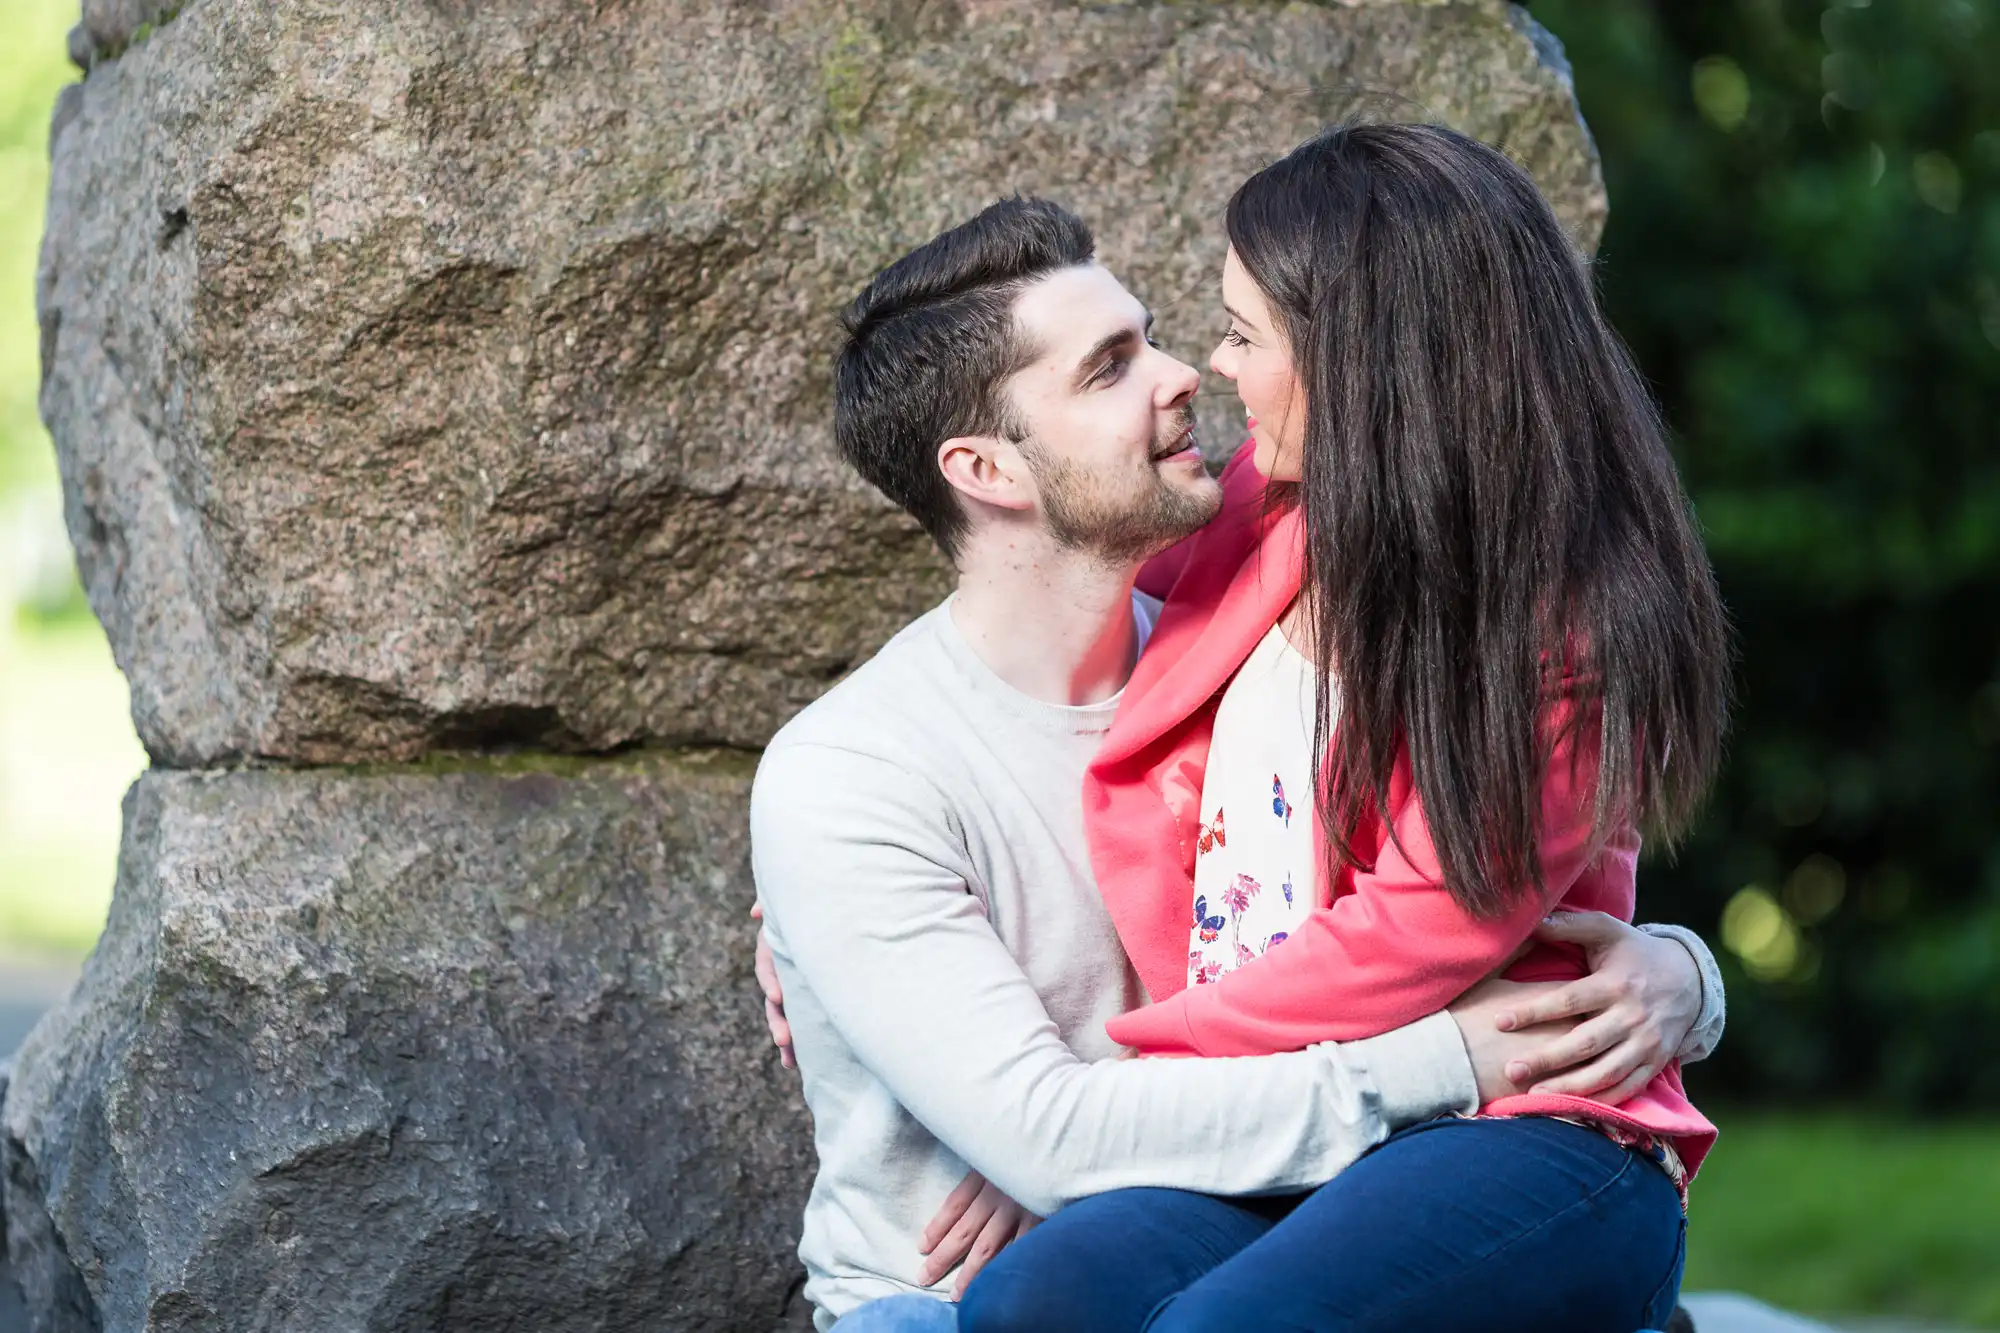 A couple embracing and looking at each other affectionately, seated in front of a large rock in a park.